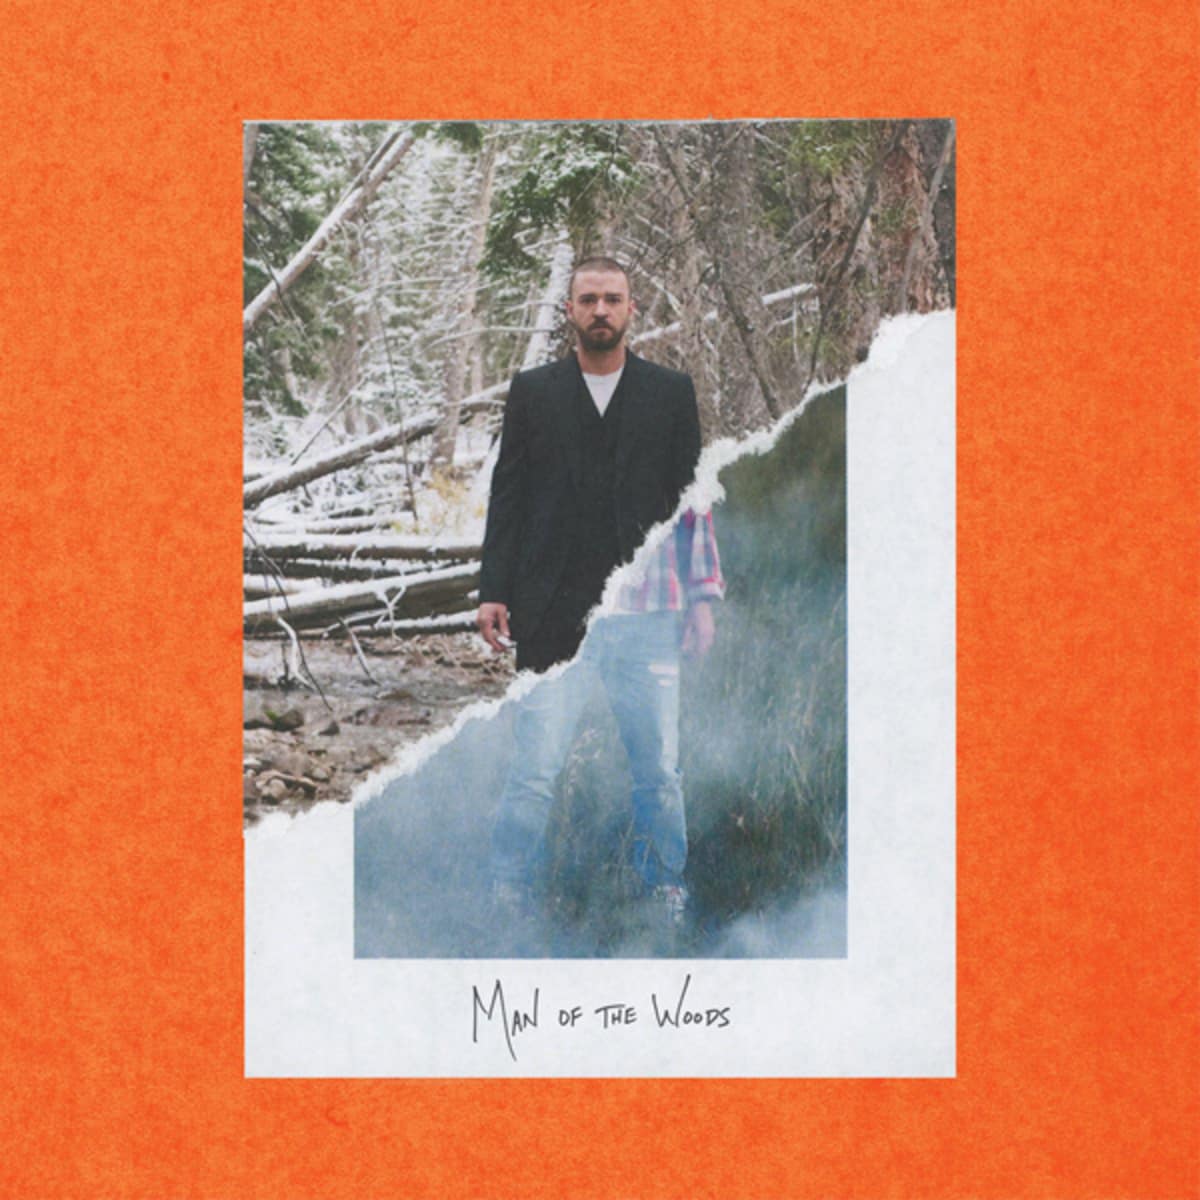 Justin Timberlake's 'Man of the Woods' album cover